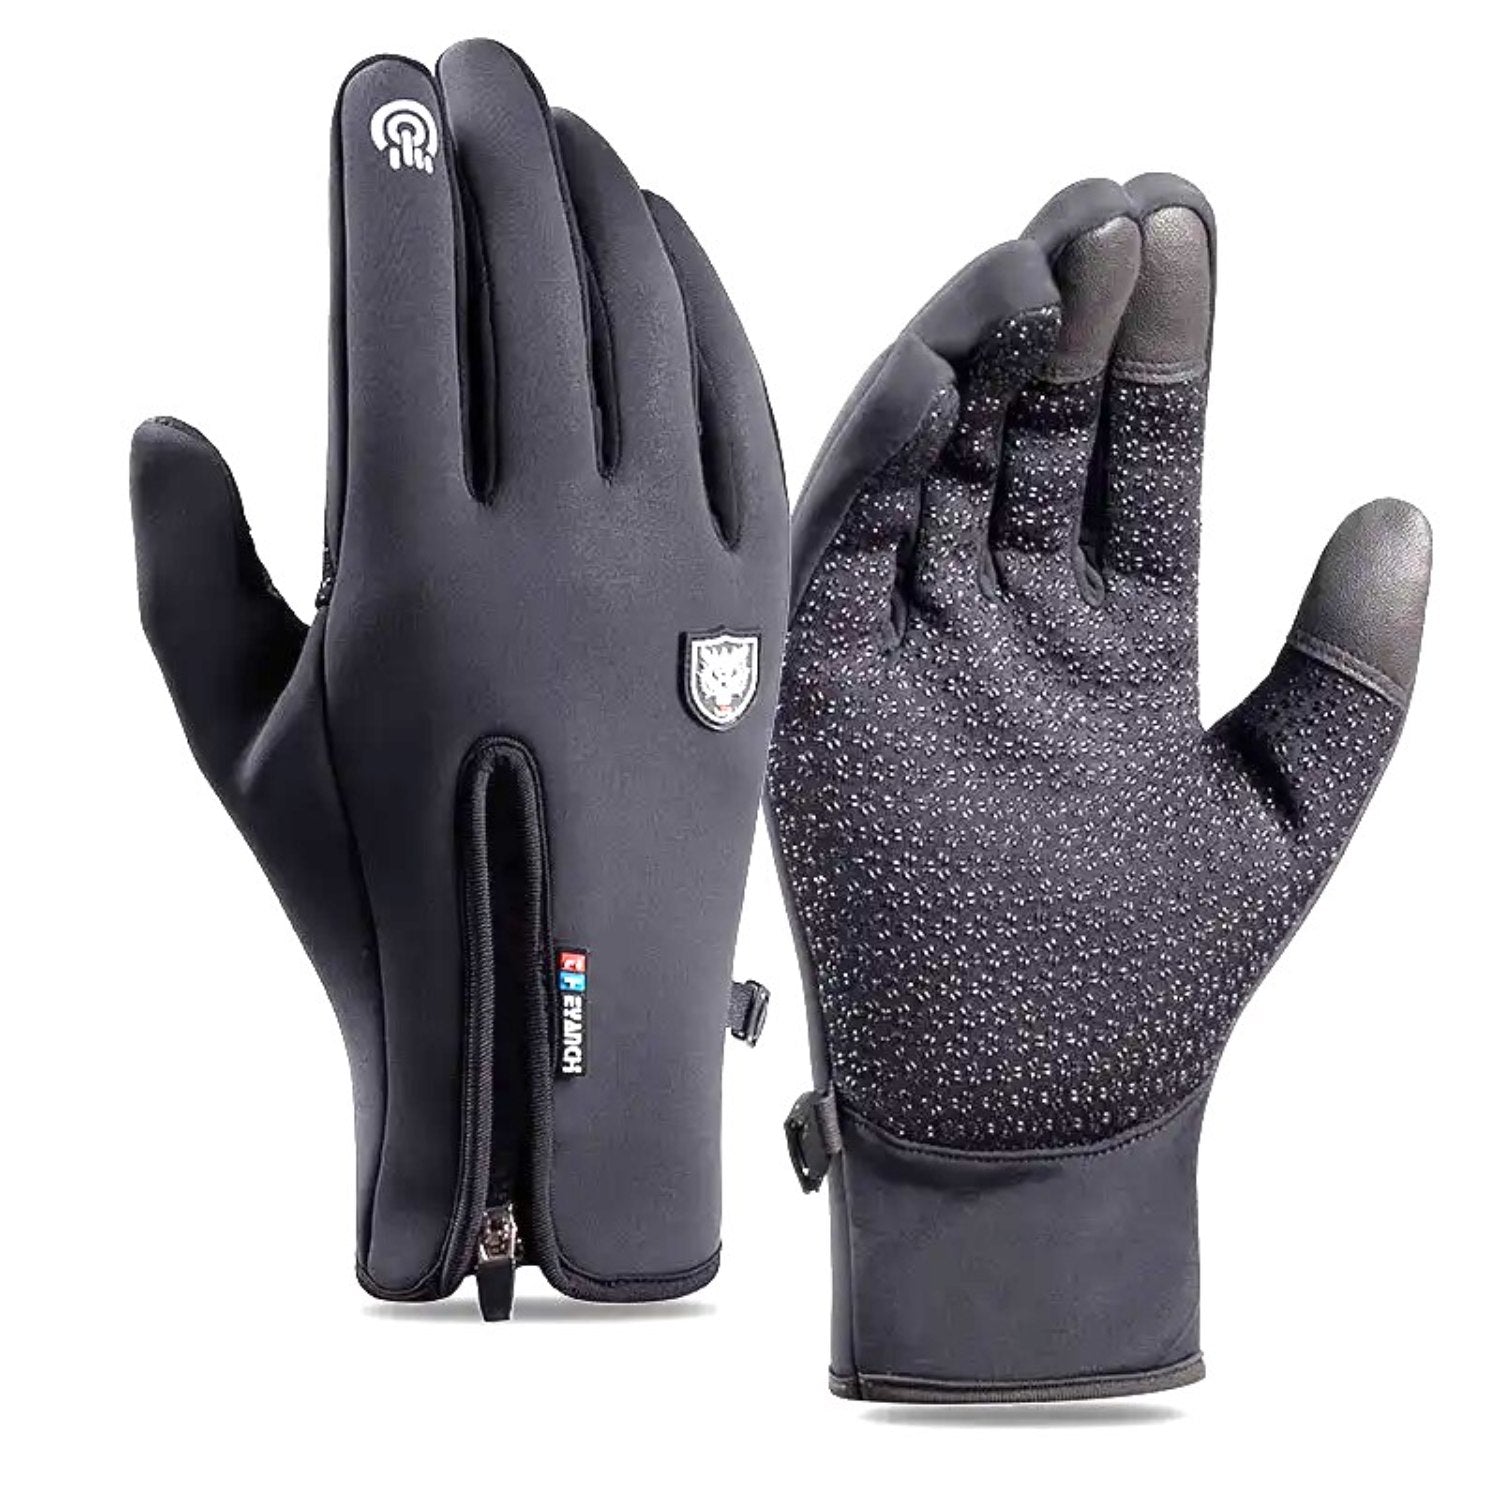 Buy Kaza Winter Windproof Gloves with Zipper Black at Gokyo Outdoor Clothing & Gear